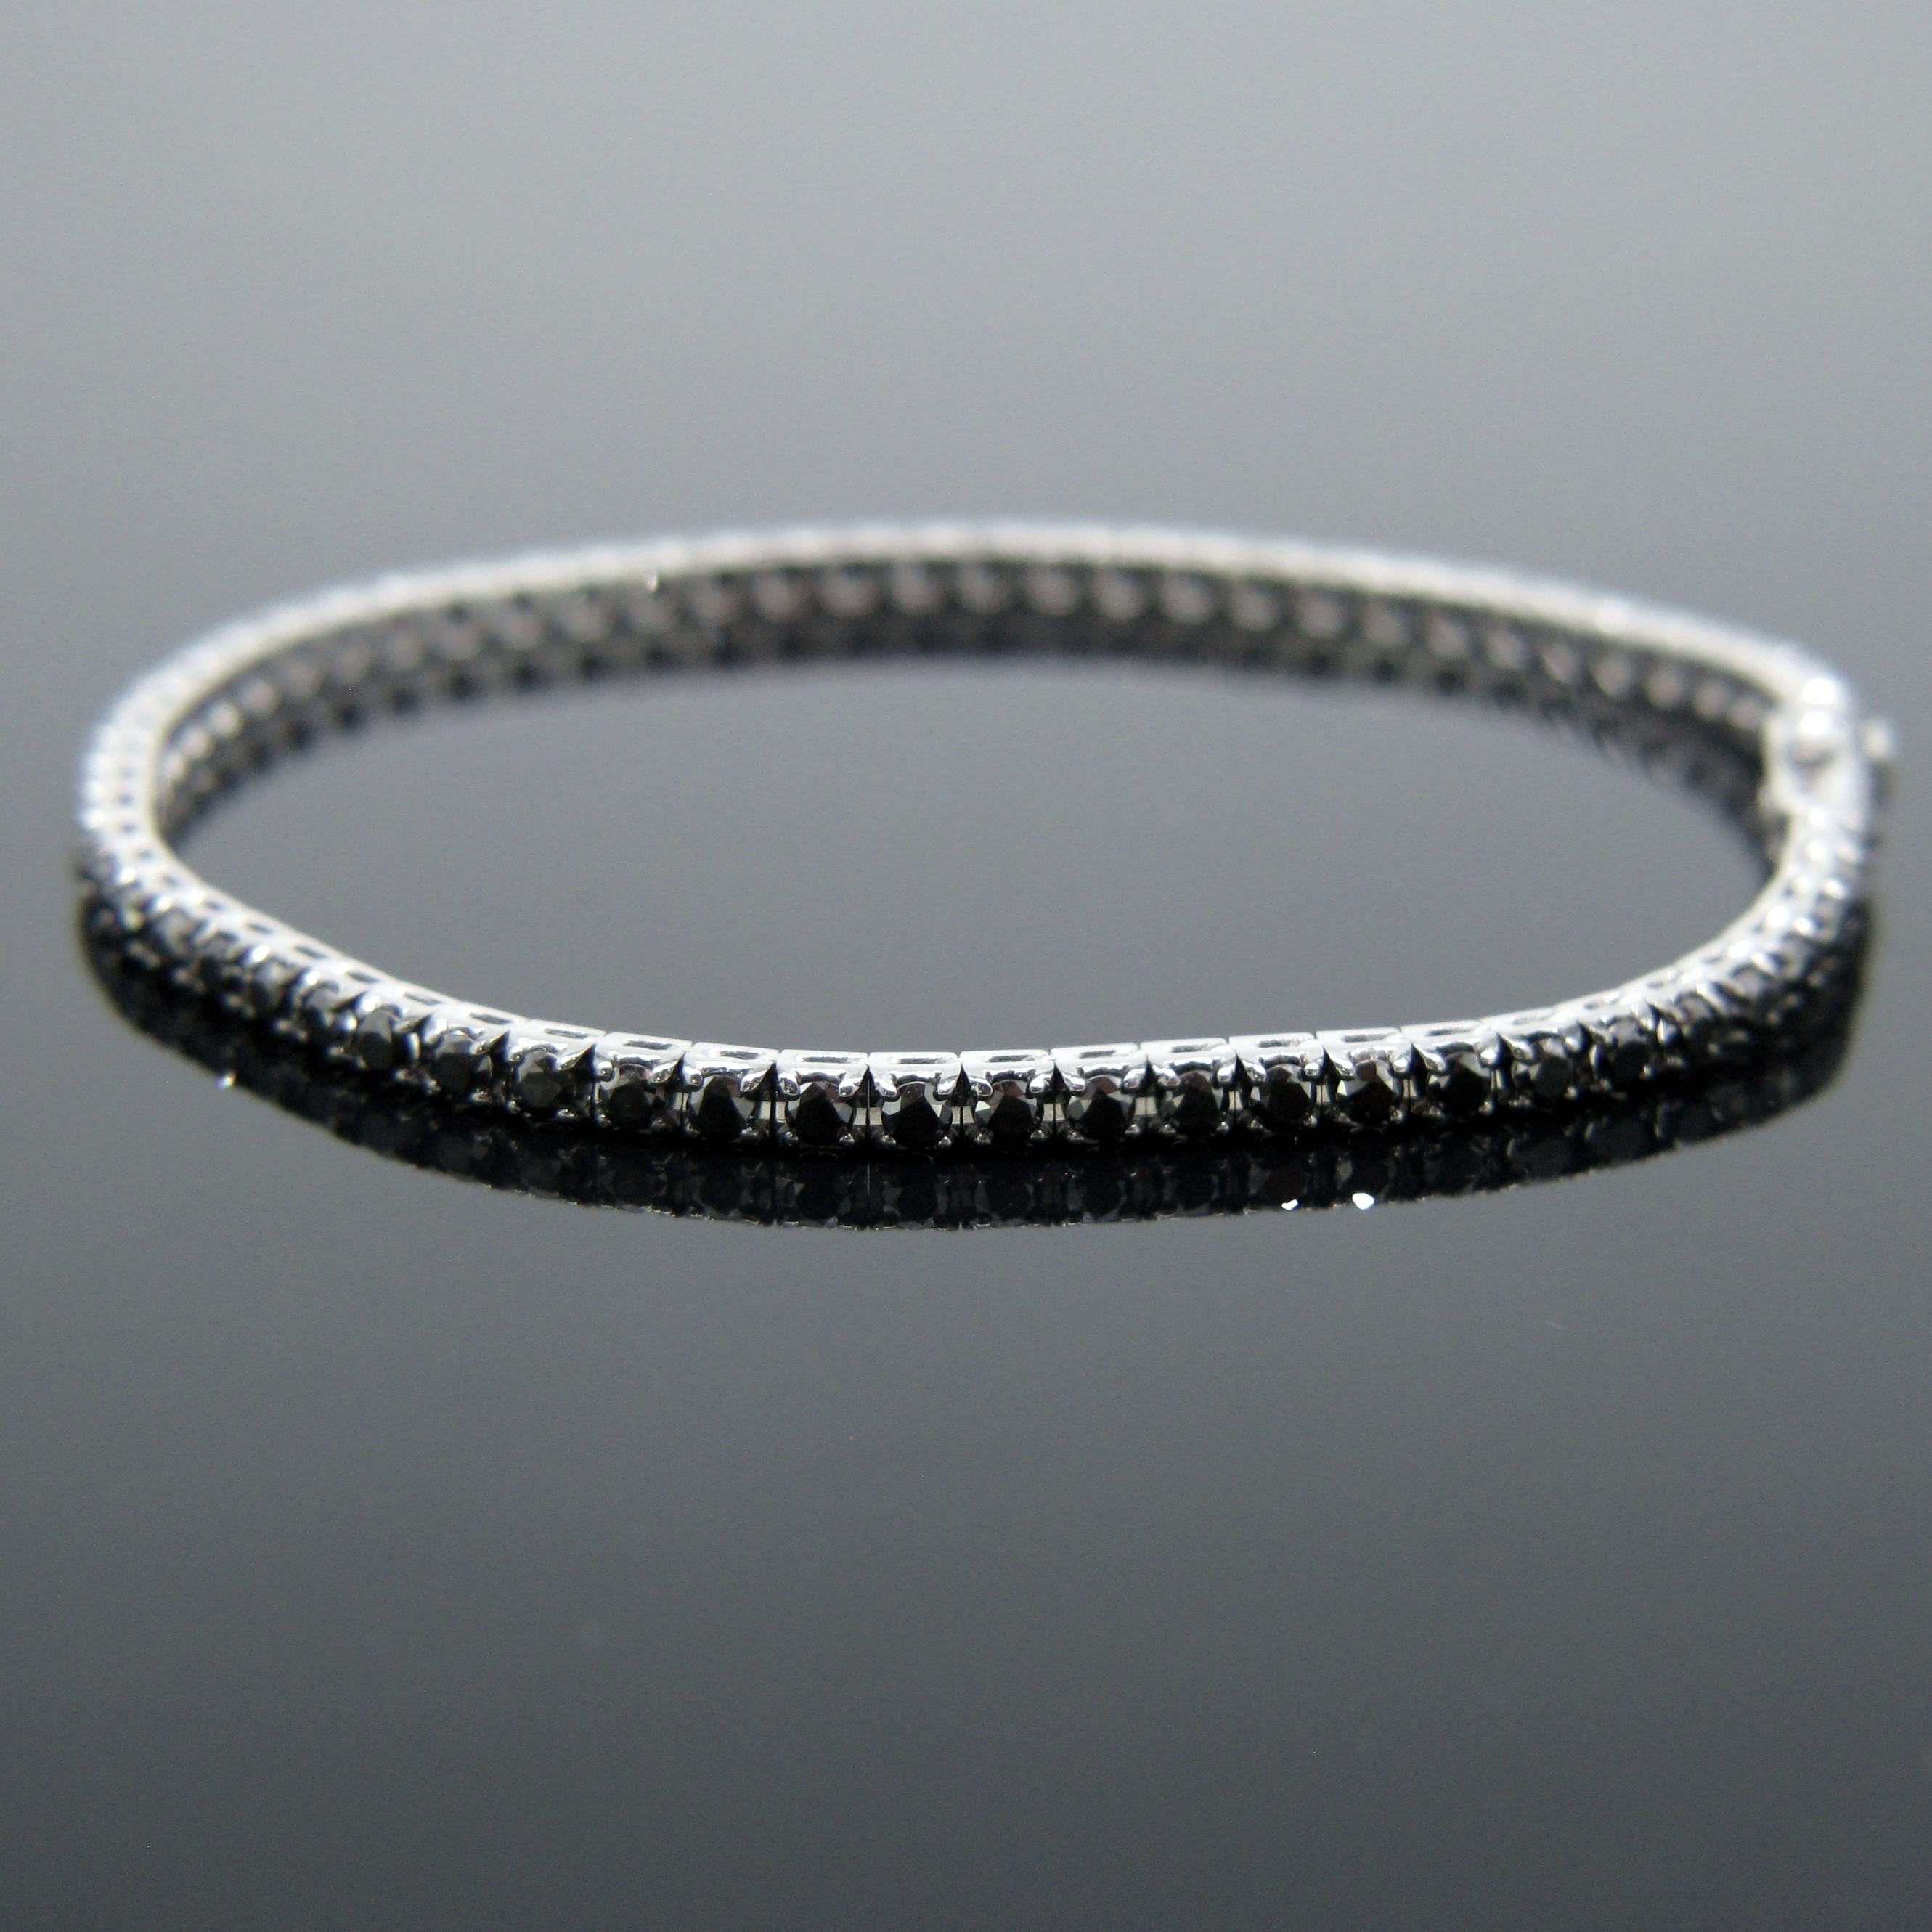 This beautiful line bracelet is made in 18kt white gold. It is adorned with 65 brilliant cut black diamonds. It is controlled wit the French eagle’s head and it is in excellent condition. This elegant tennis bracelet can be worn every day or for